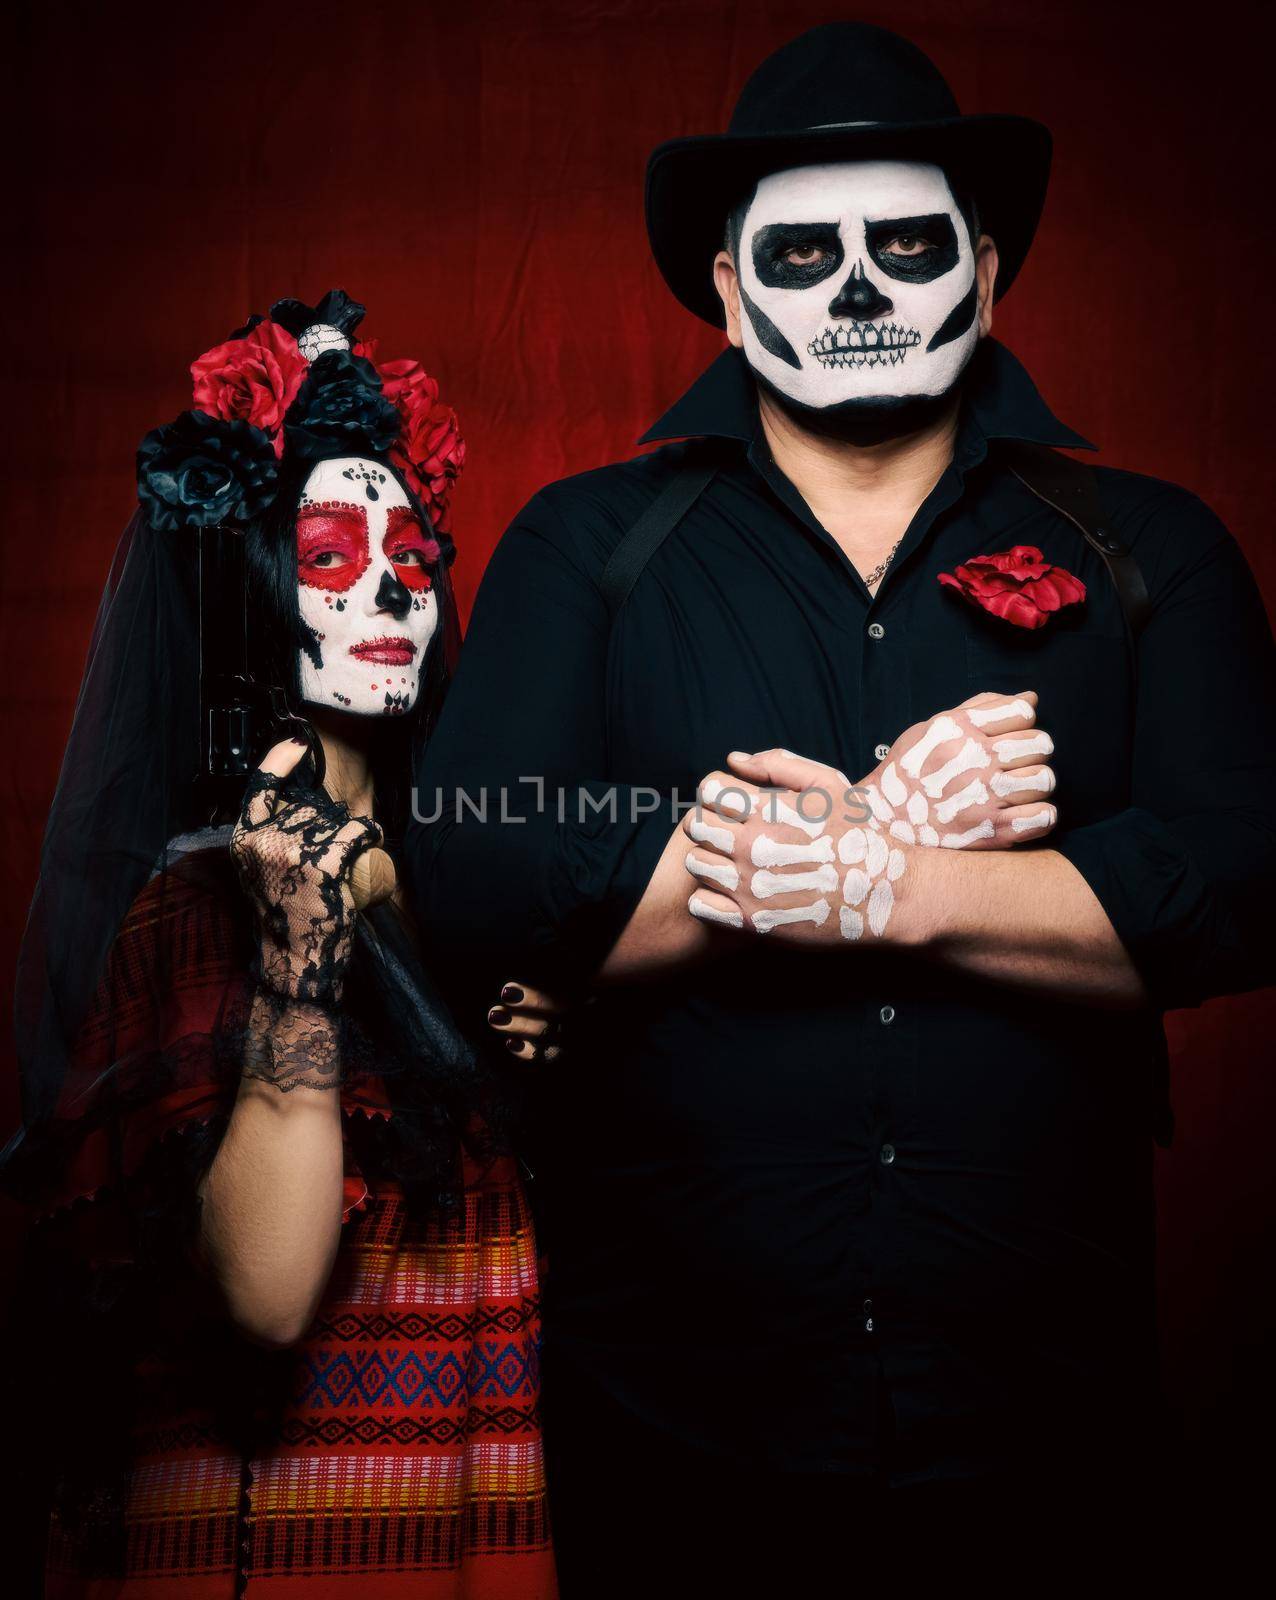 beautiful woman with a sugar skull makeup with a wreath of flowers on her head and a skeleton man in a black hat holding a gun by ndanko